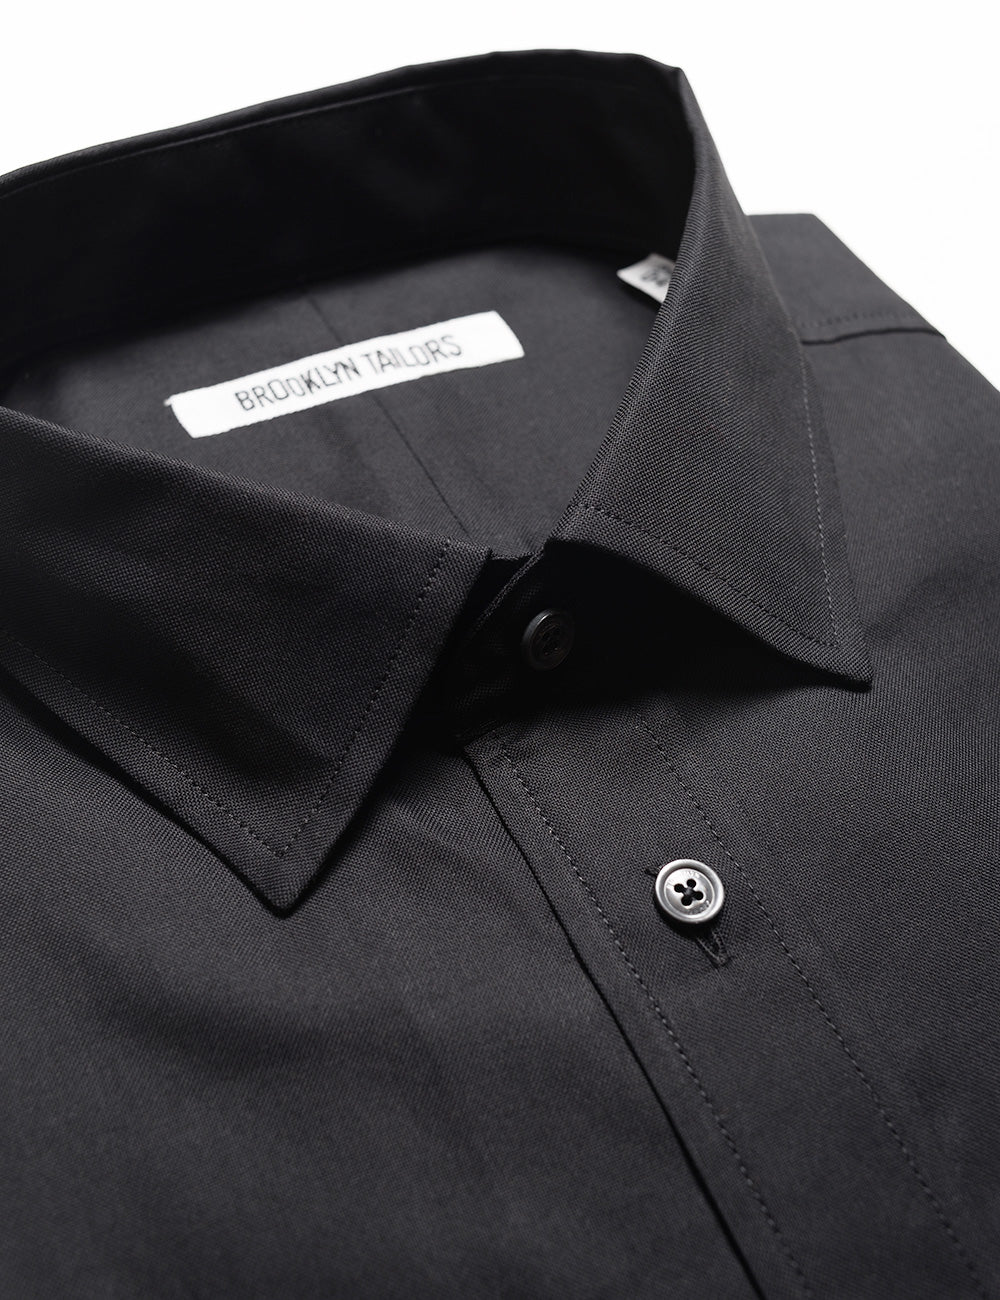 Detail shot of collar, labels, buttons, and fabric texture on Brooklyn Tailors BKT20 Slim Dress Shirt in Pinpoint Oxford - Black